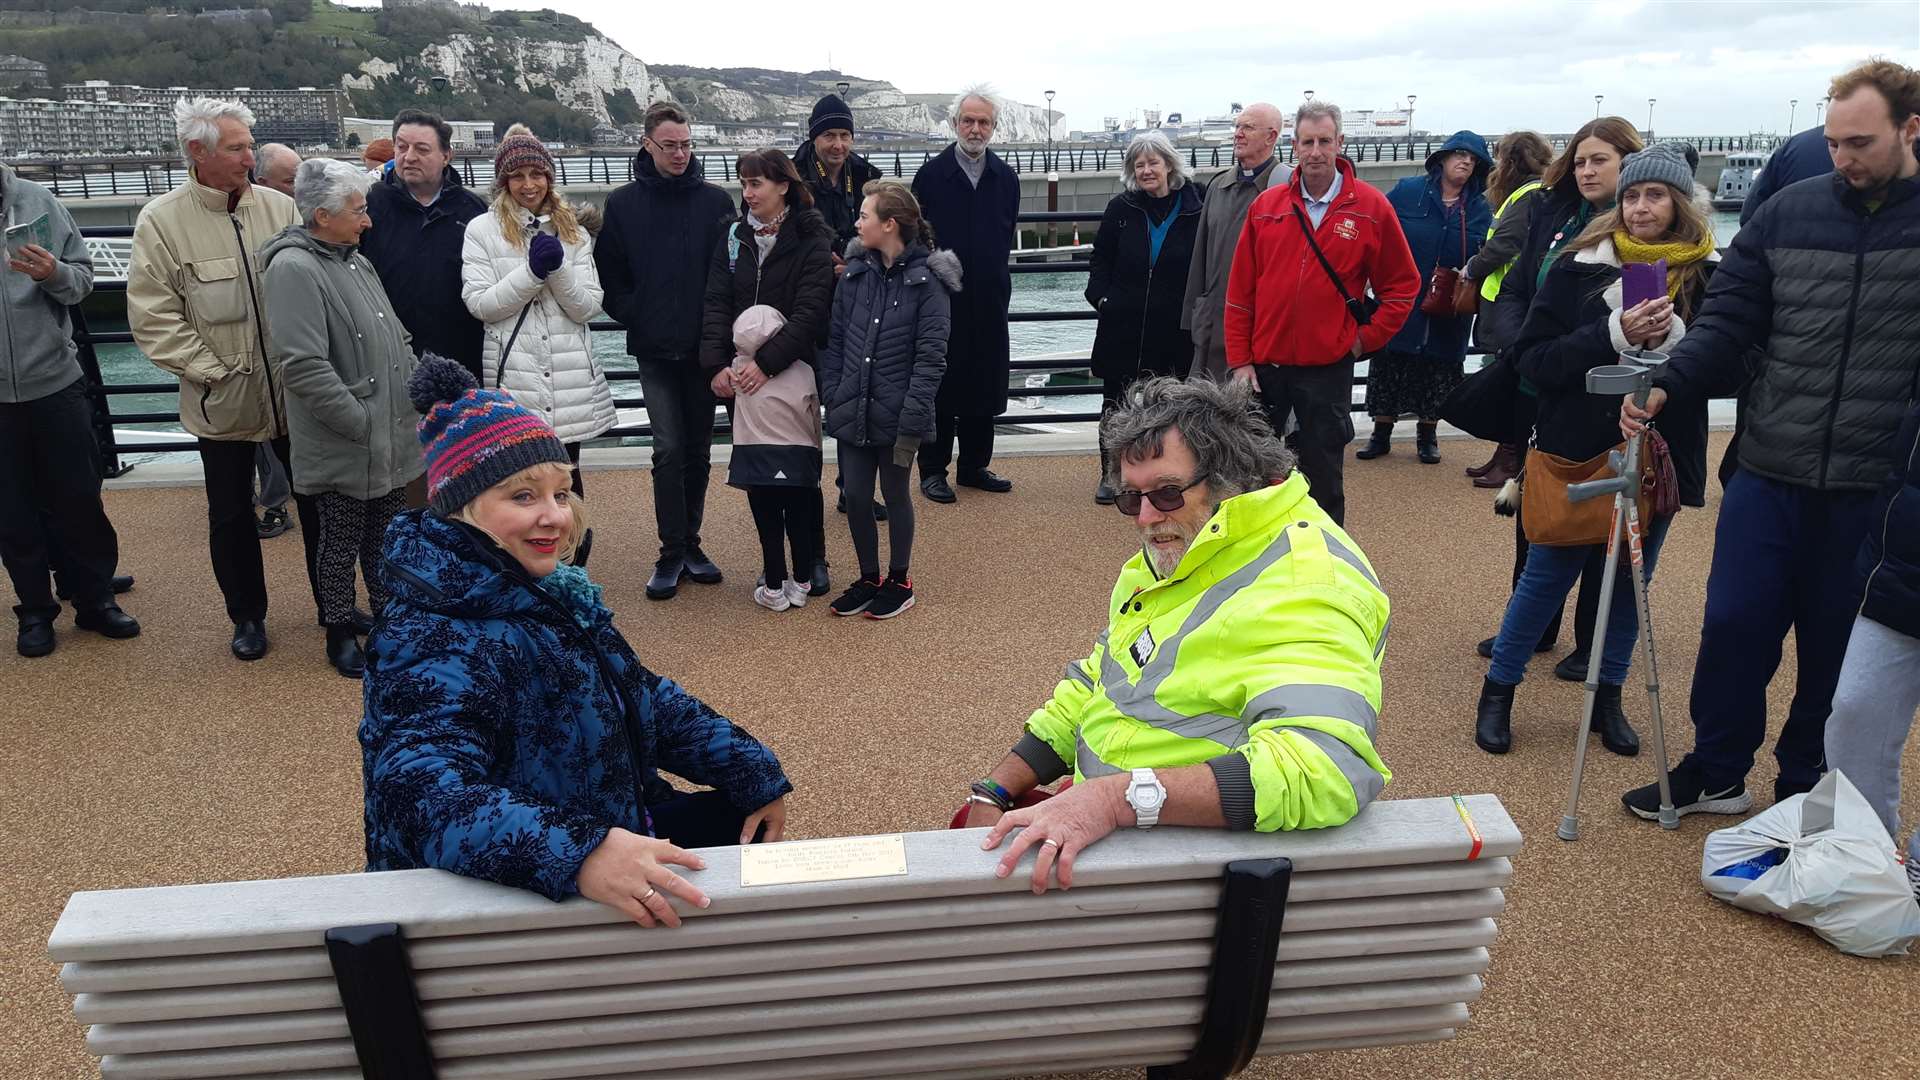 Martin and Linda Turner on the memorial bench with the gathering of well wishers. Picture: Sam Lennon